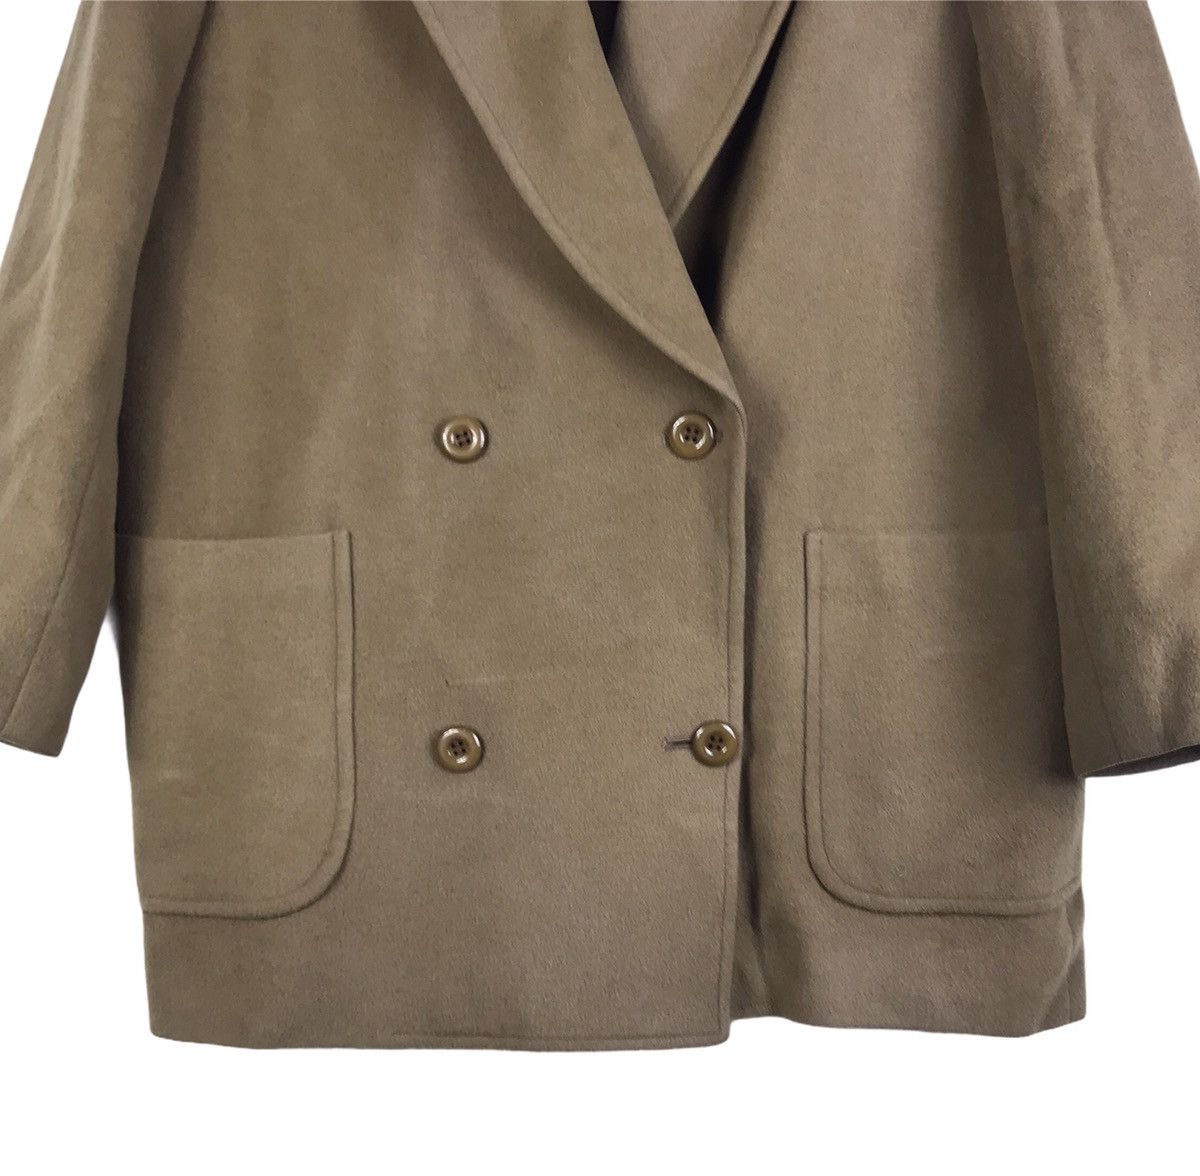 Burberry Double Breasted Wool Peacoat Jacket - 4